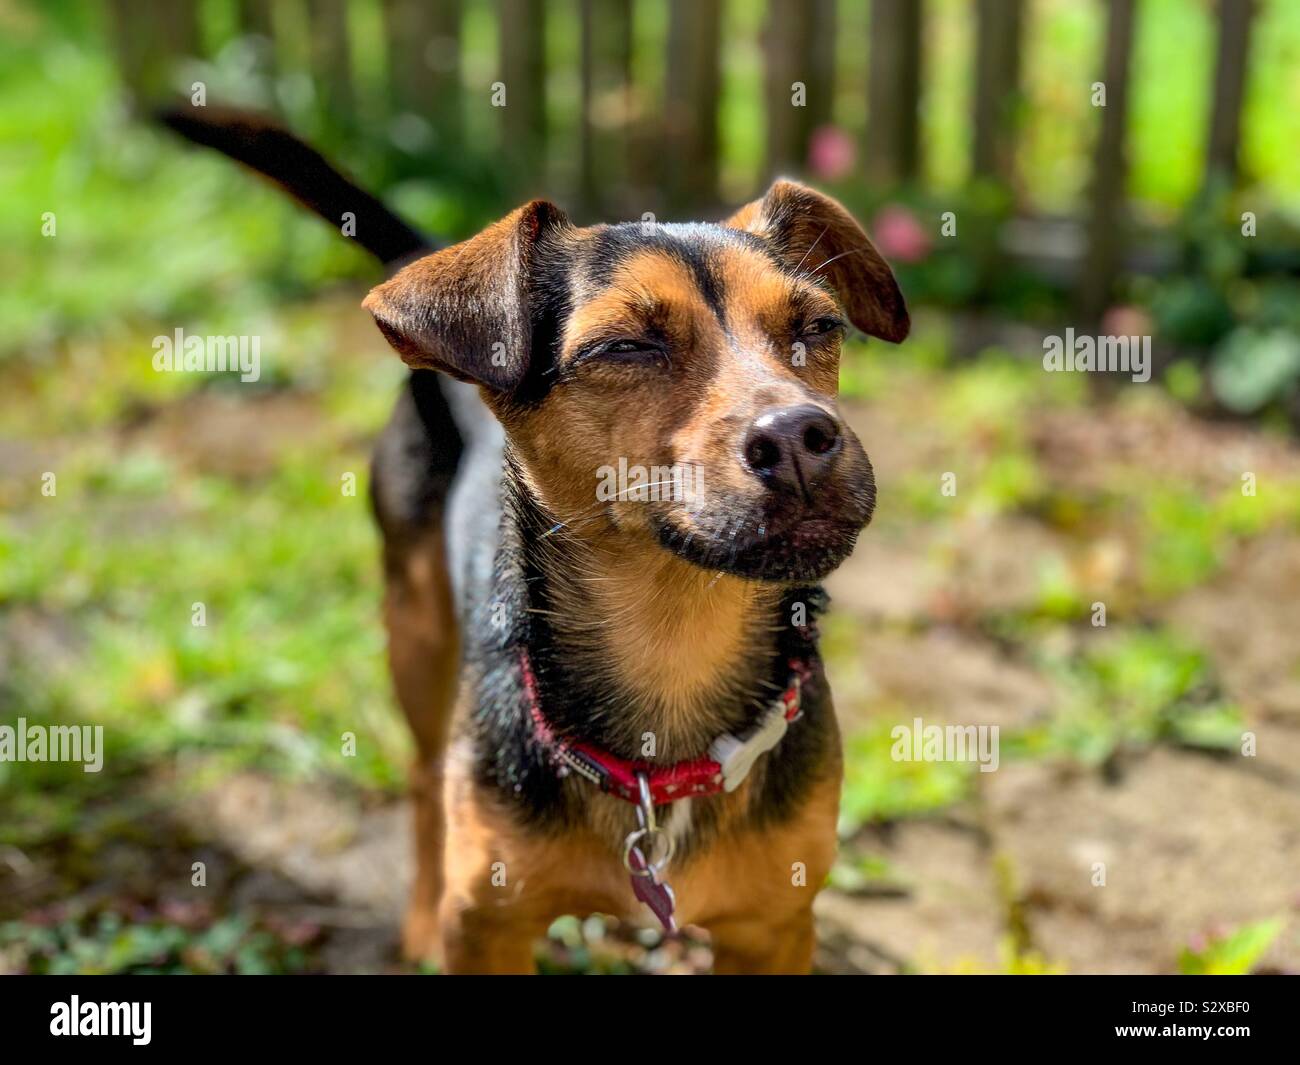 A close up portrait of a cute jack russell teacup terrier companion dog. 2 year old pet pup in the garden with tan brown and black coat. Stock Photo